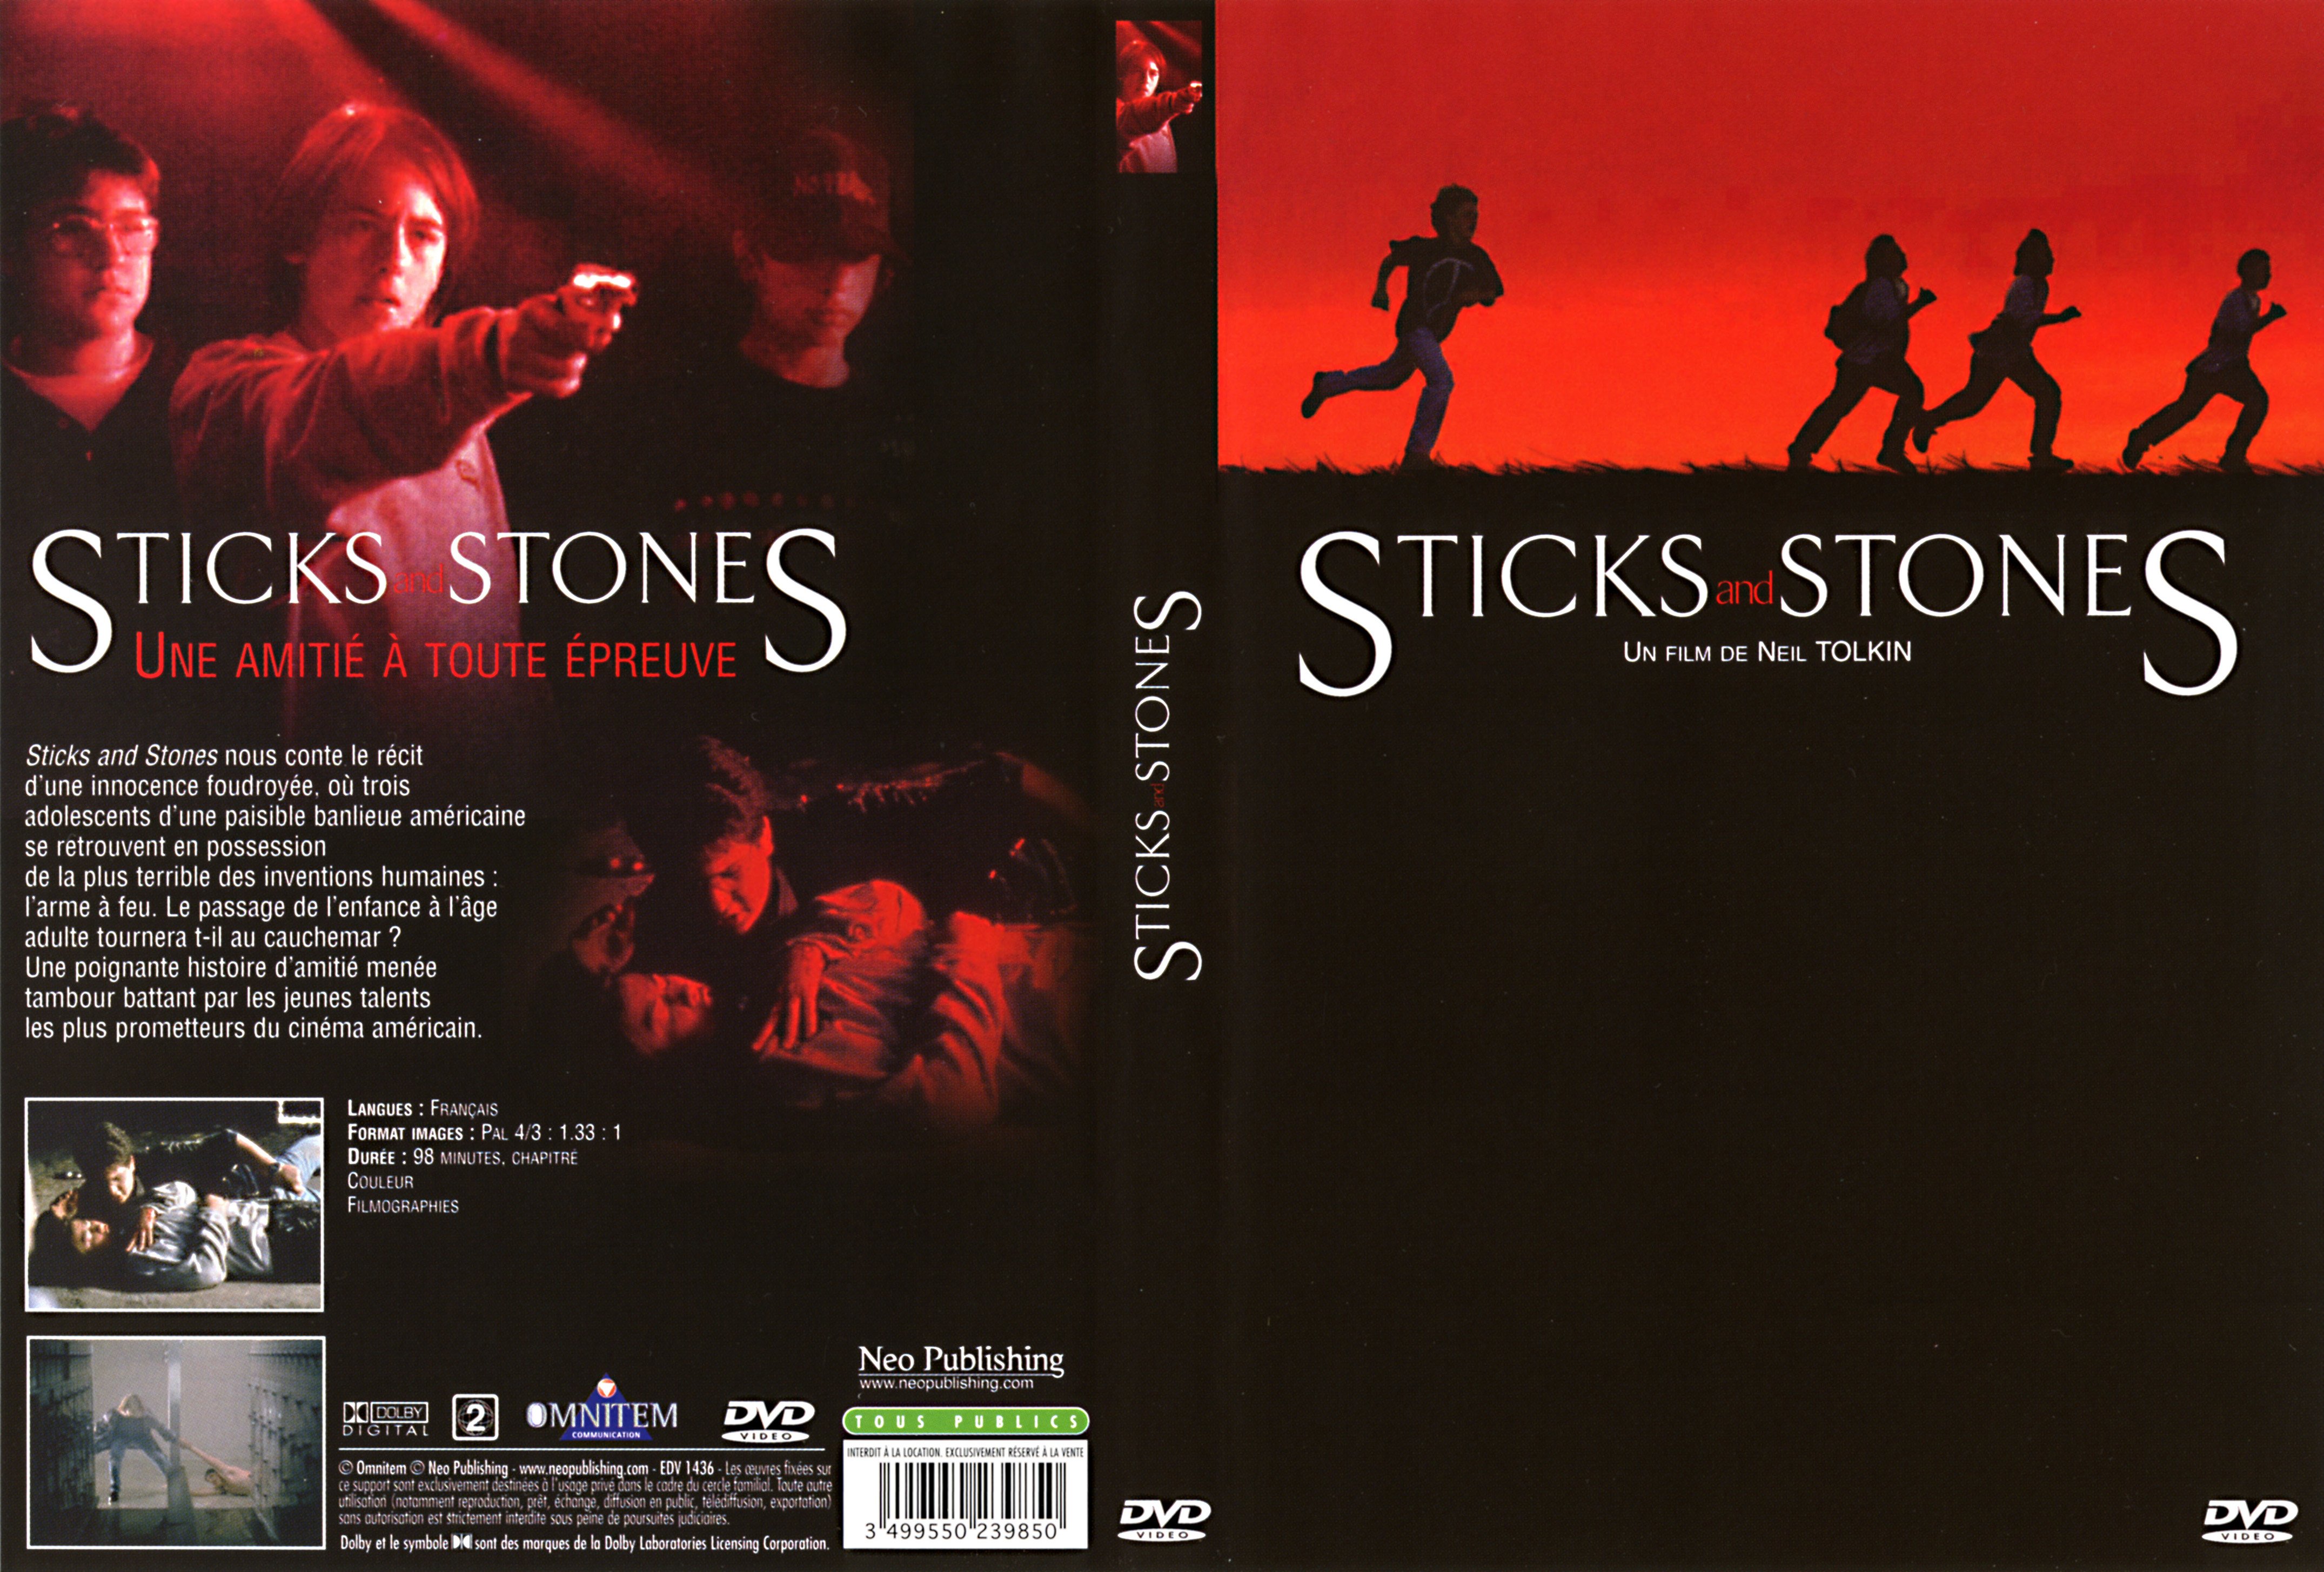 Jaquette DVD Sticks and stones